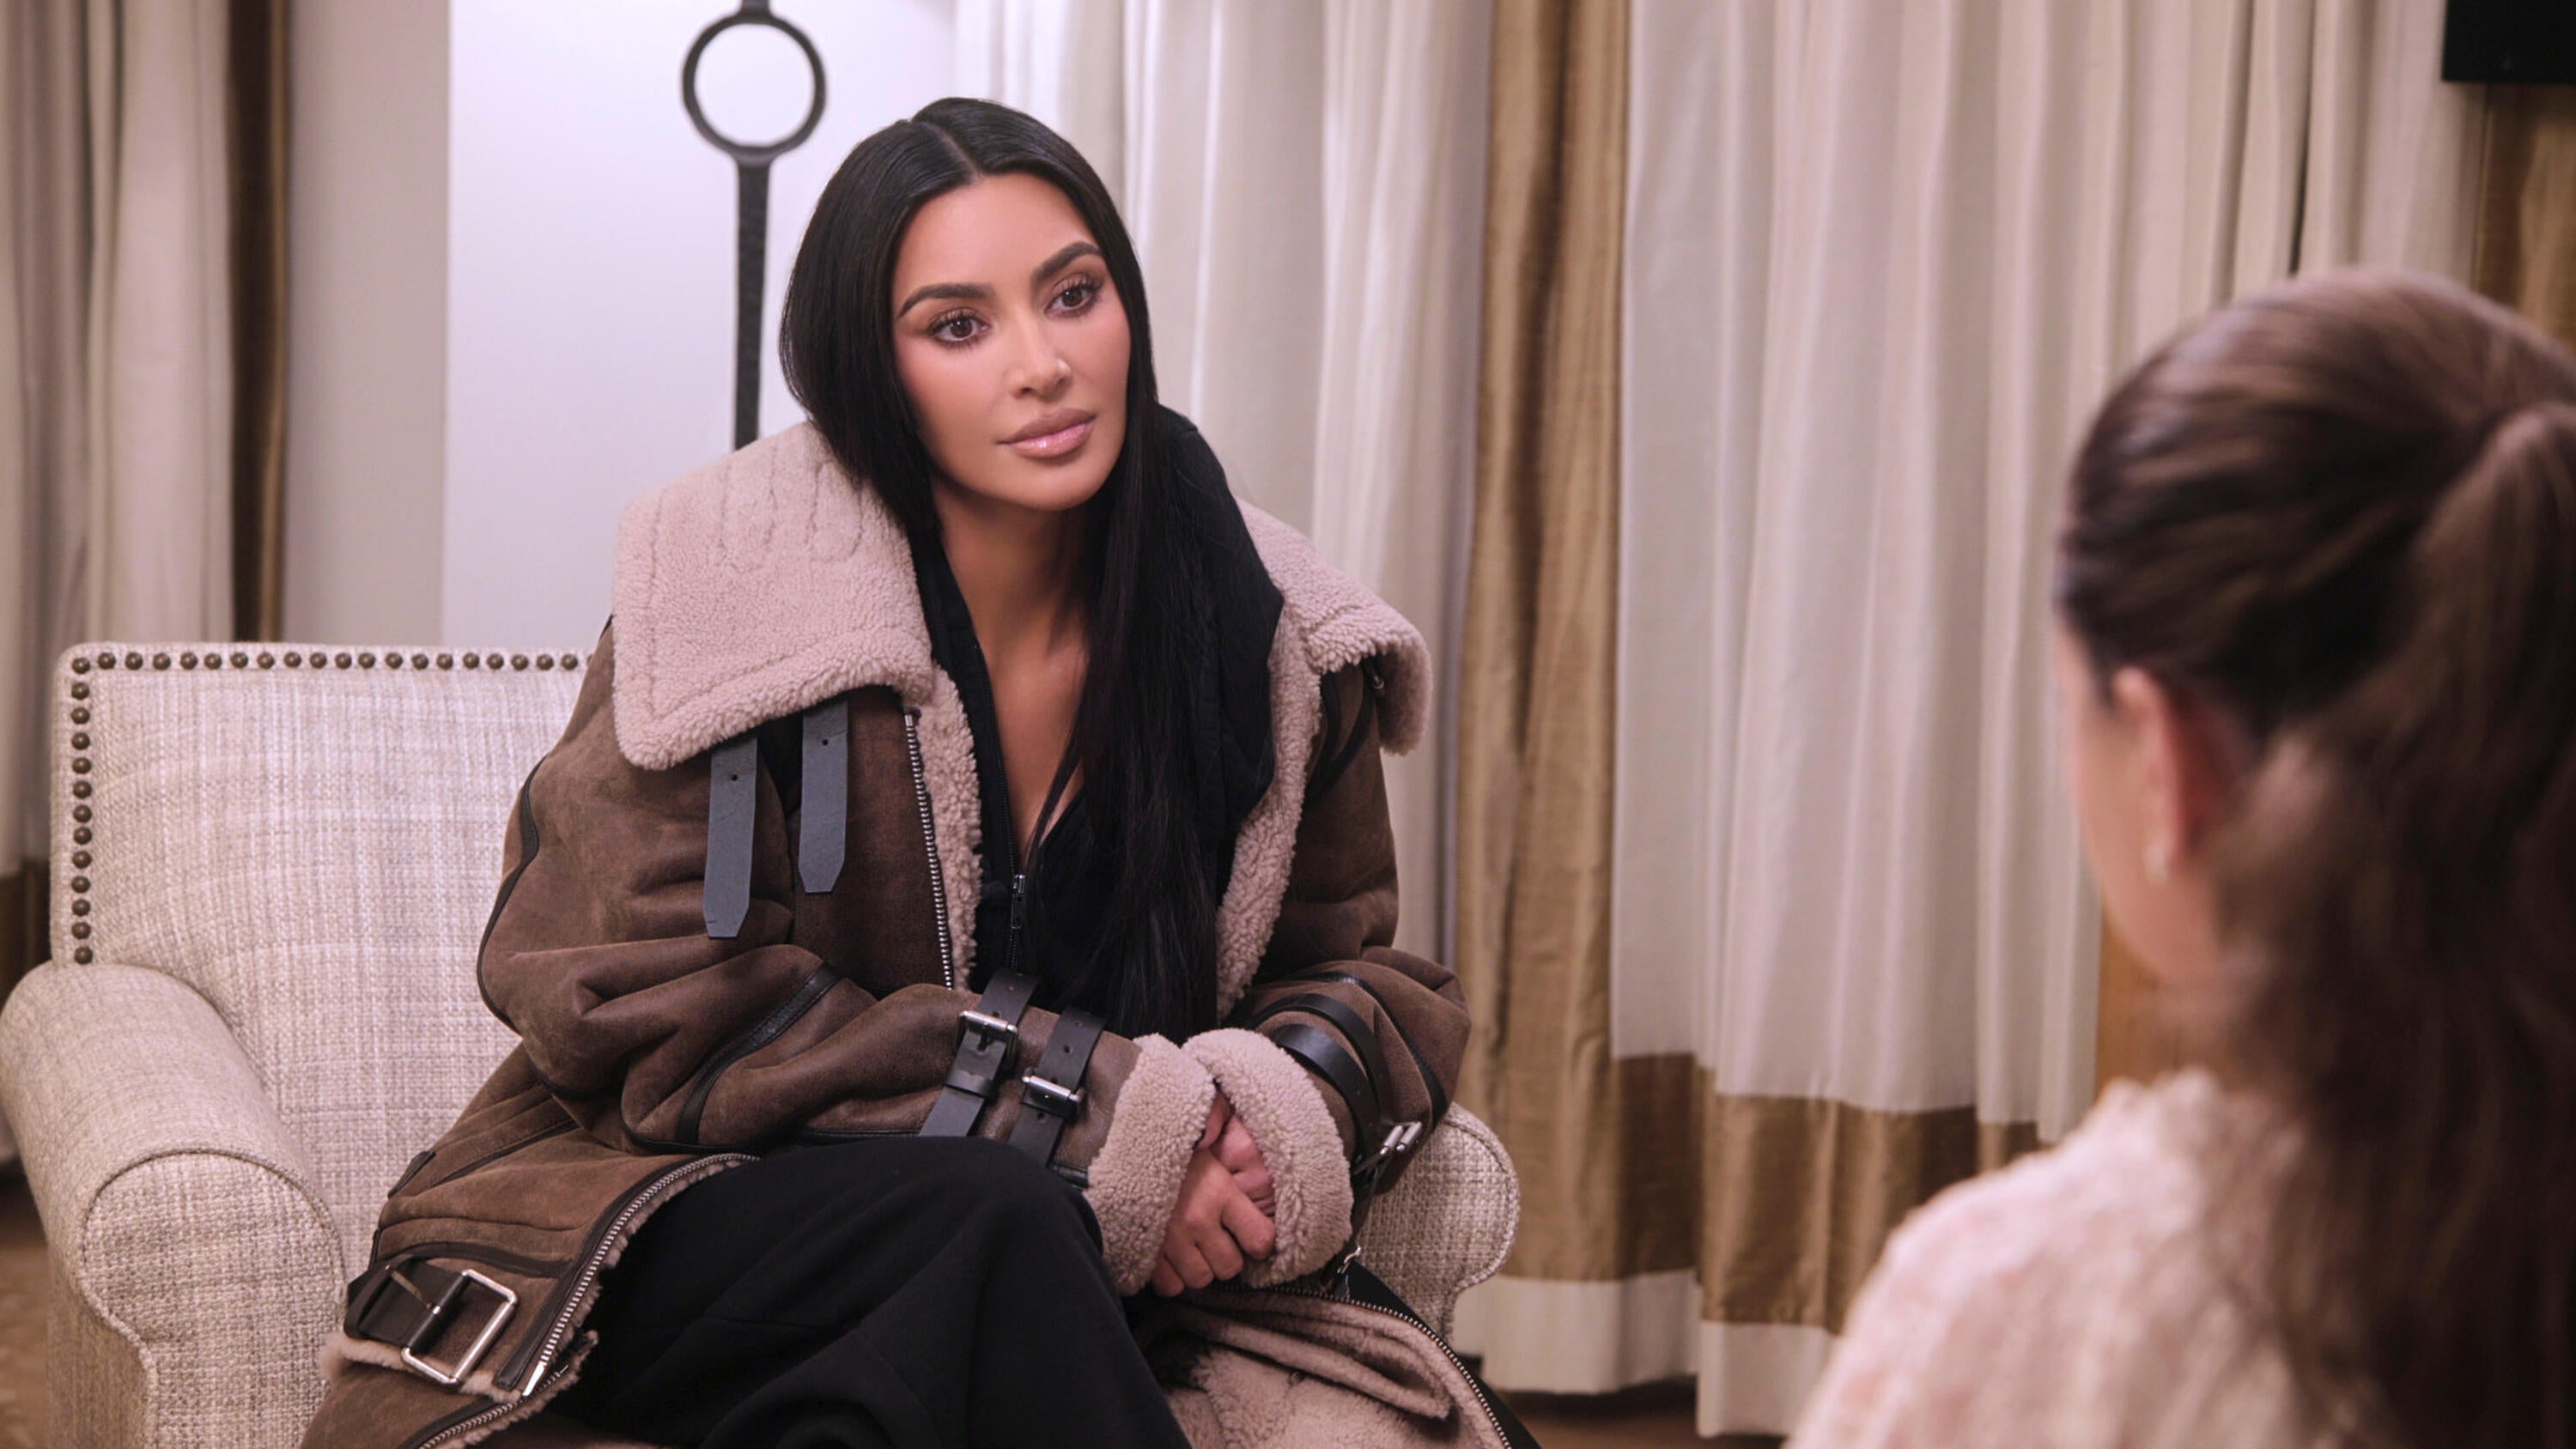 Kim Kardashian has been on a journey to become a lawyer since 2019